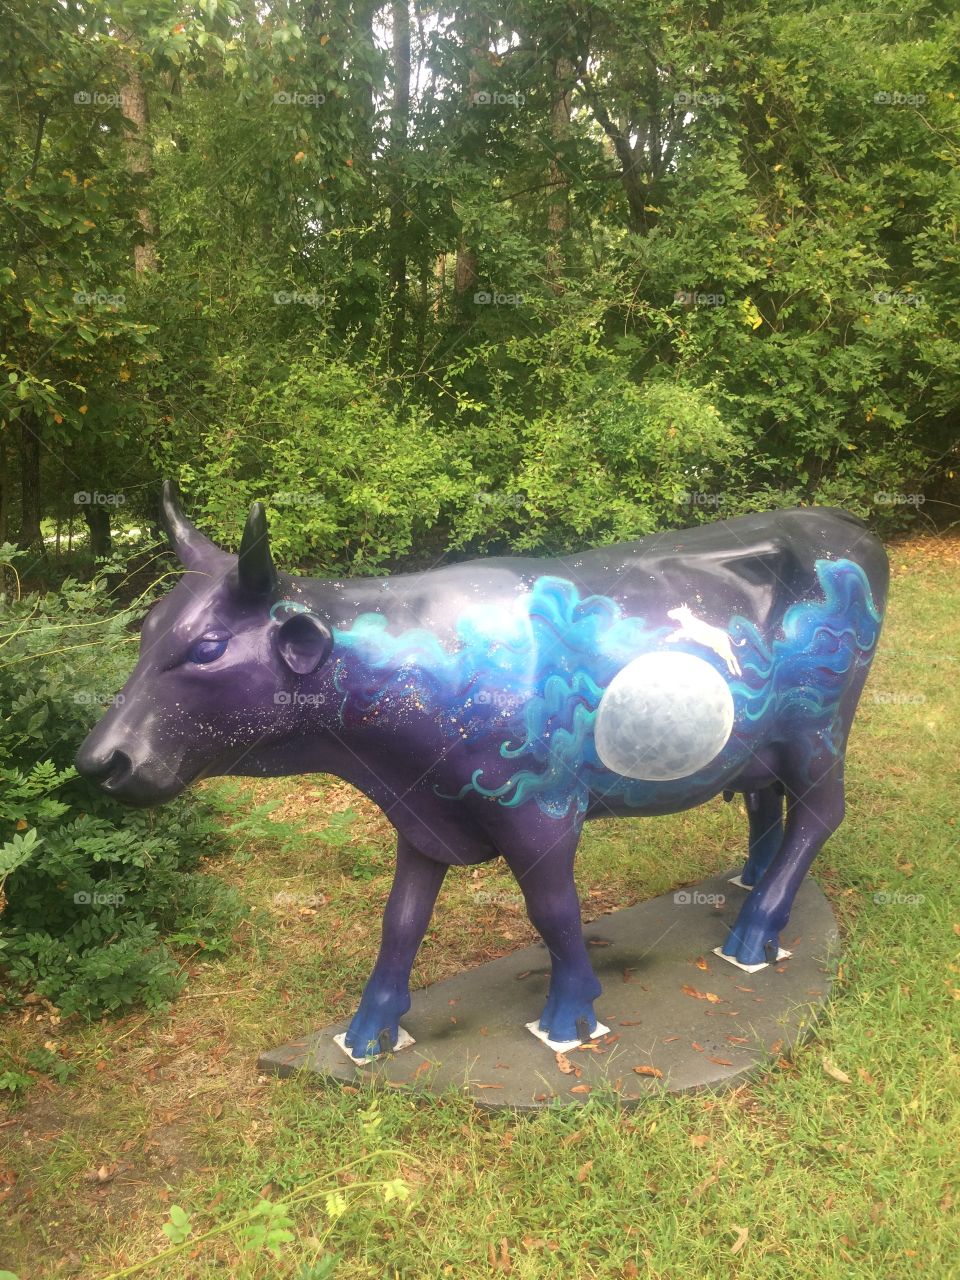 Painted cow statue. 